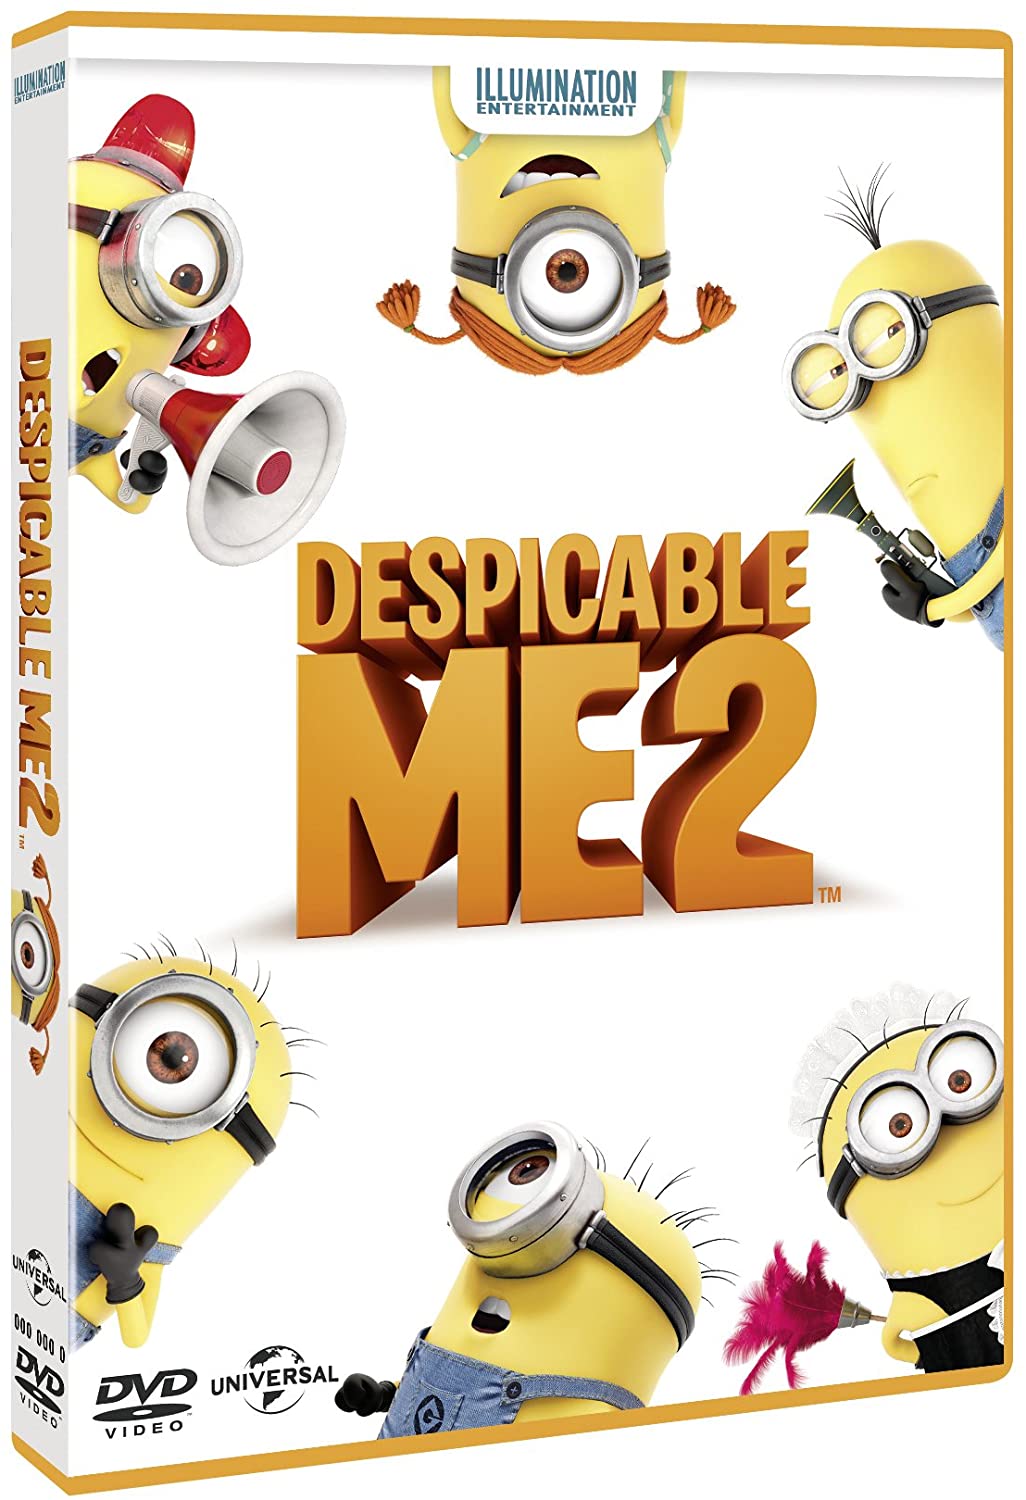 Despicable Me 2 DVD Rated U RRP 4.99 CLEARANCE XL 2.99